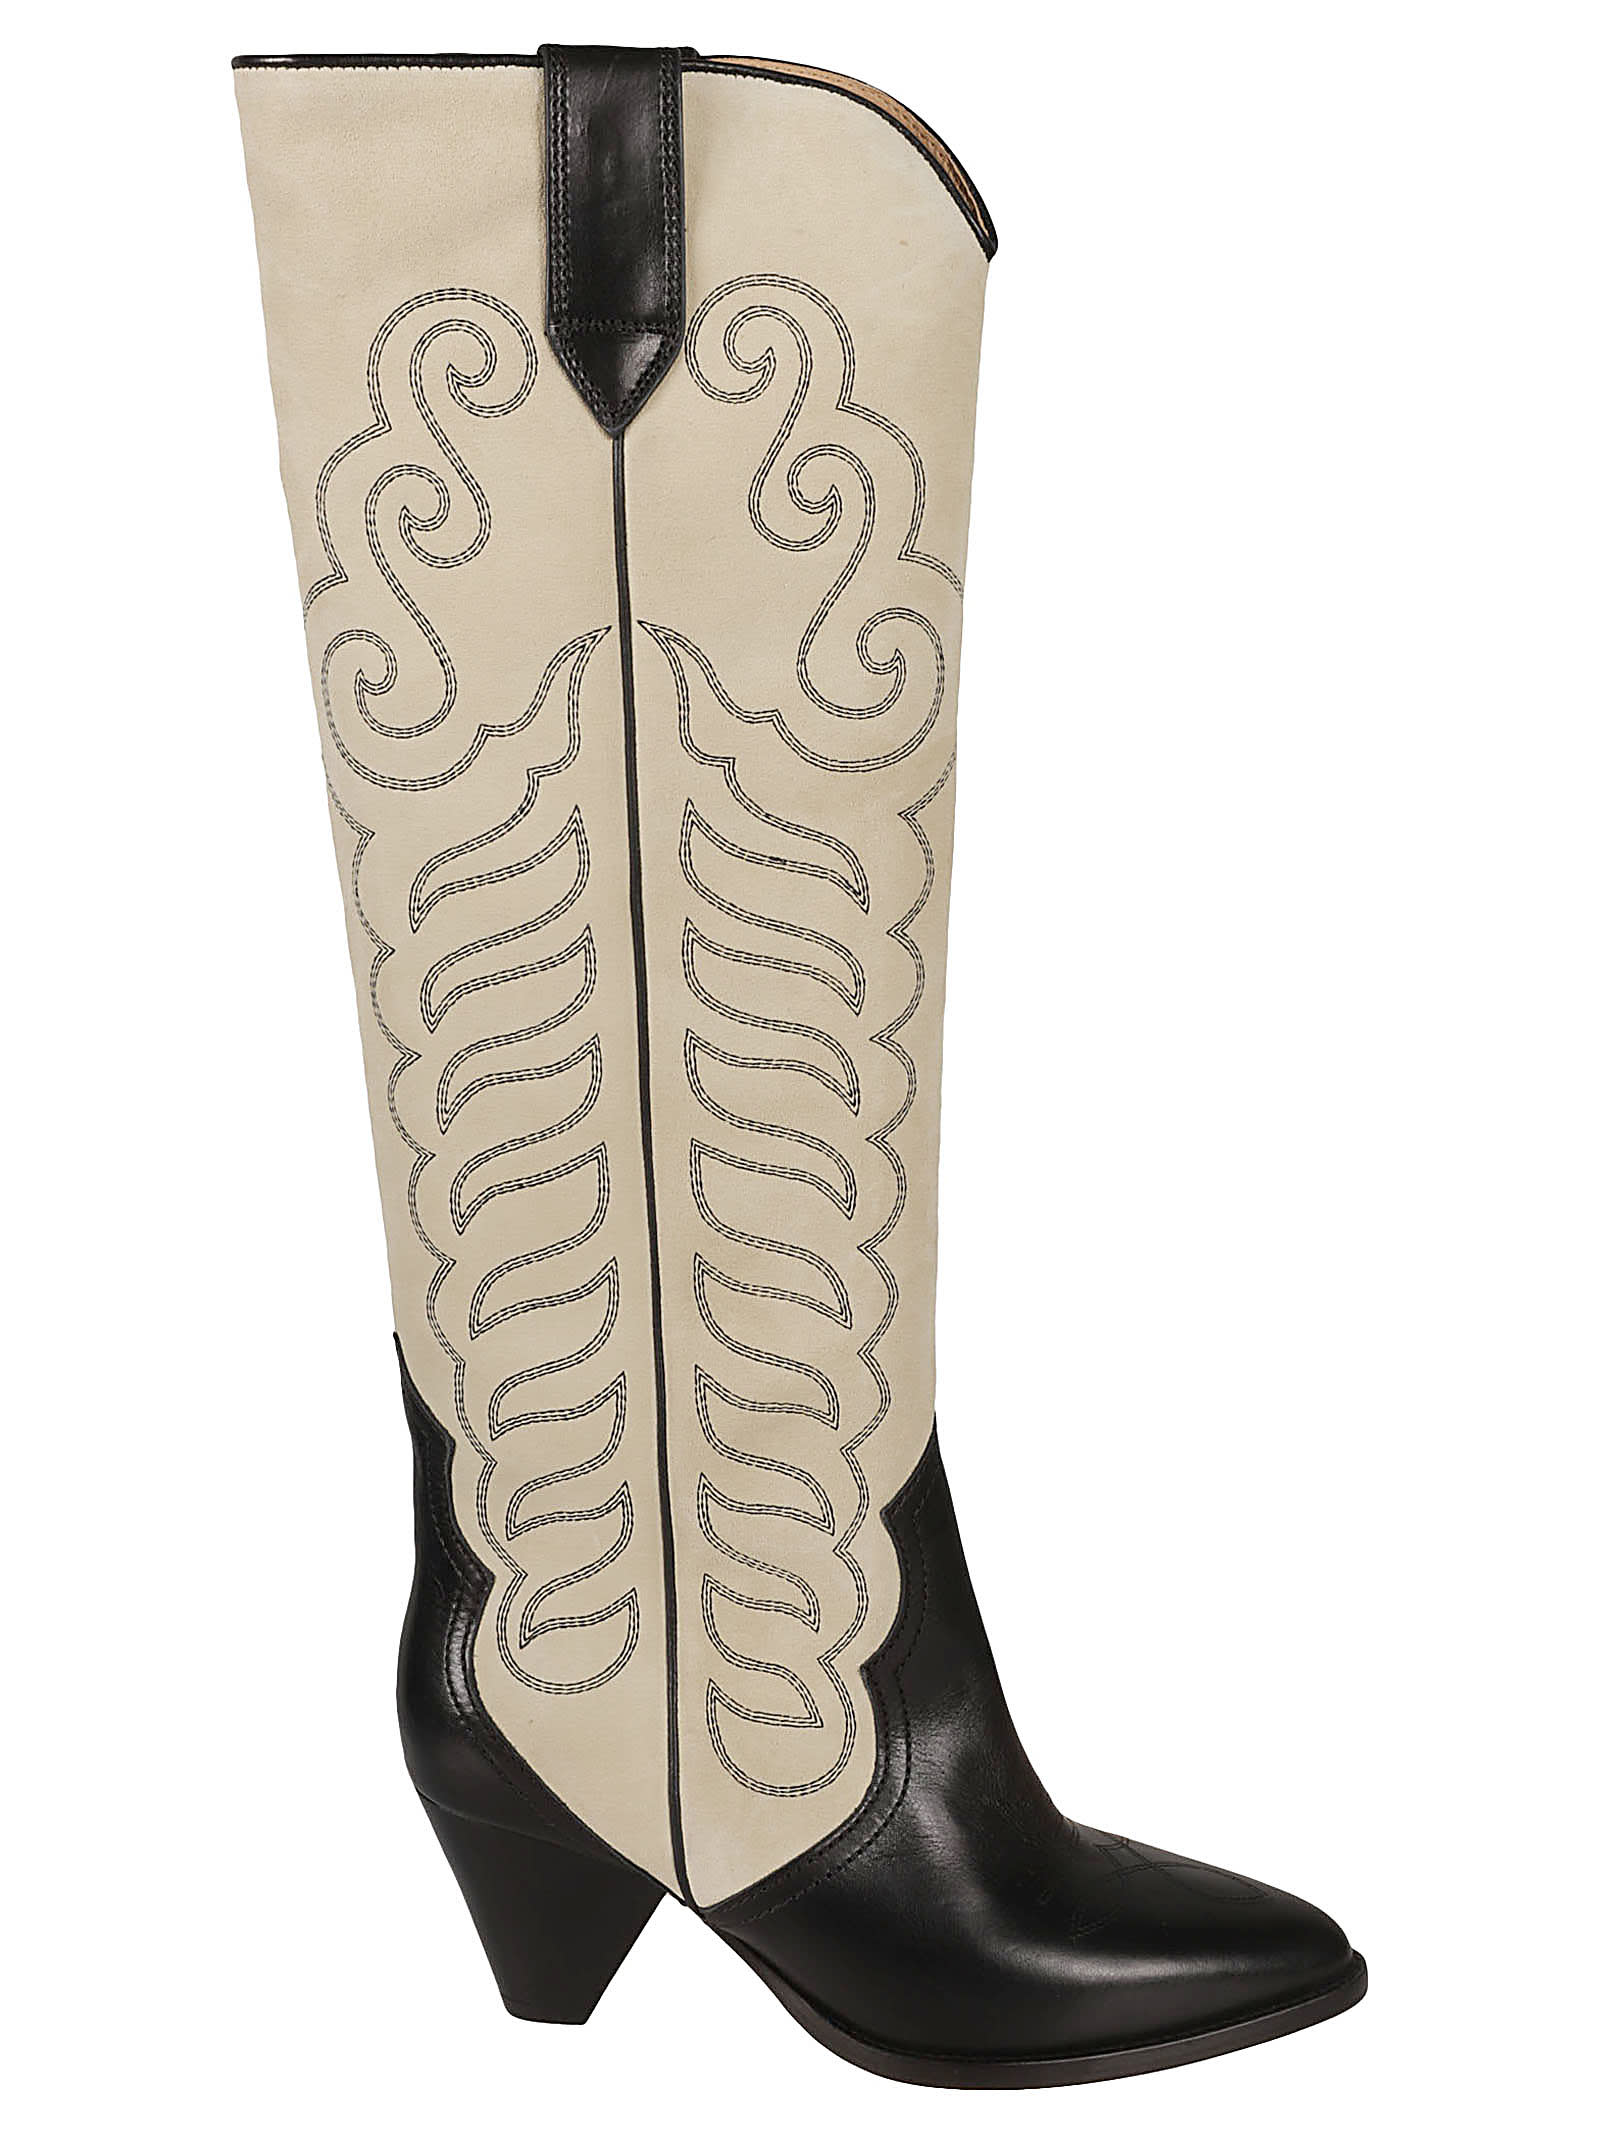 ISABEL MARANT SAN EMBROIDERED BOOTS